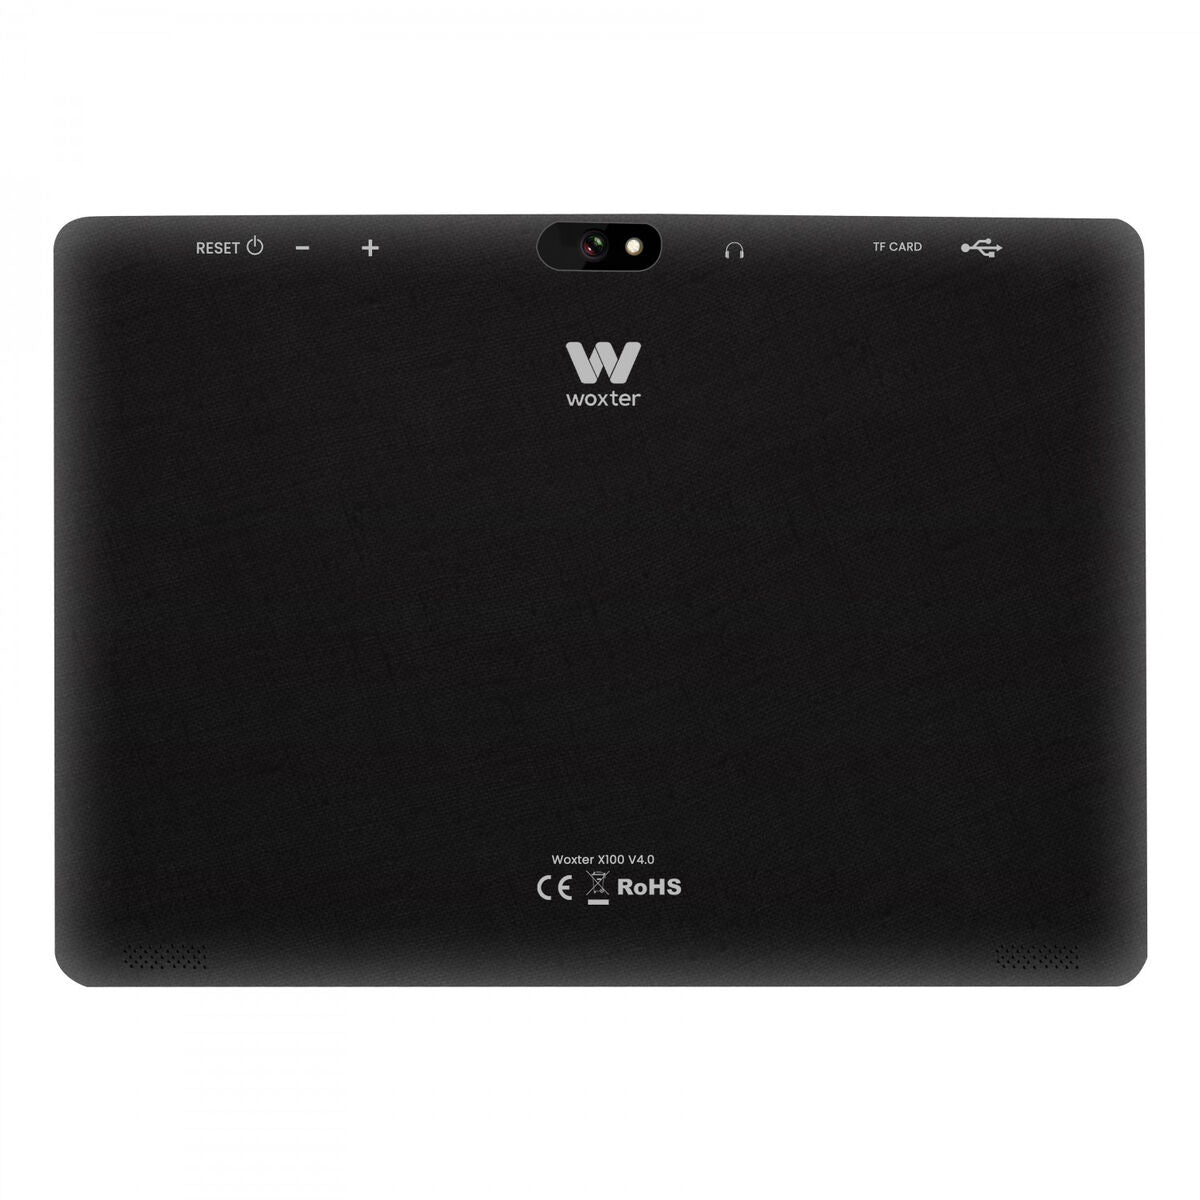 Tablet Woxter X-100 Pro 10,1" 2 GB RAM 16 GB Black 10.1", Woxter, Computing, tablet-woxter-x-100-pro-10-1-2-gb-ram-16-gb-black-10-1, :Black, :RAM 2 GB, Brand_Woxter, category-reference-2609, category-reference-2617, category-reference-2626, category-reference-t-19685, Condition_NEW, Price_100 - 200, telephones & tablets, Teleworking, RiotNook